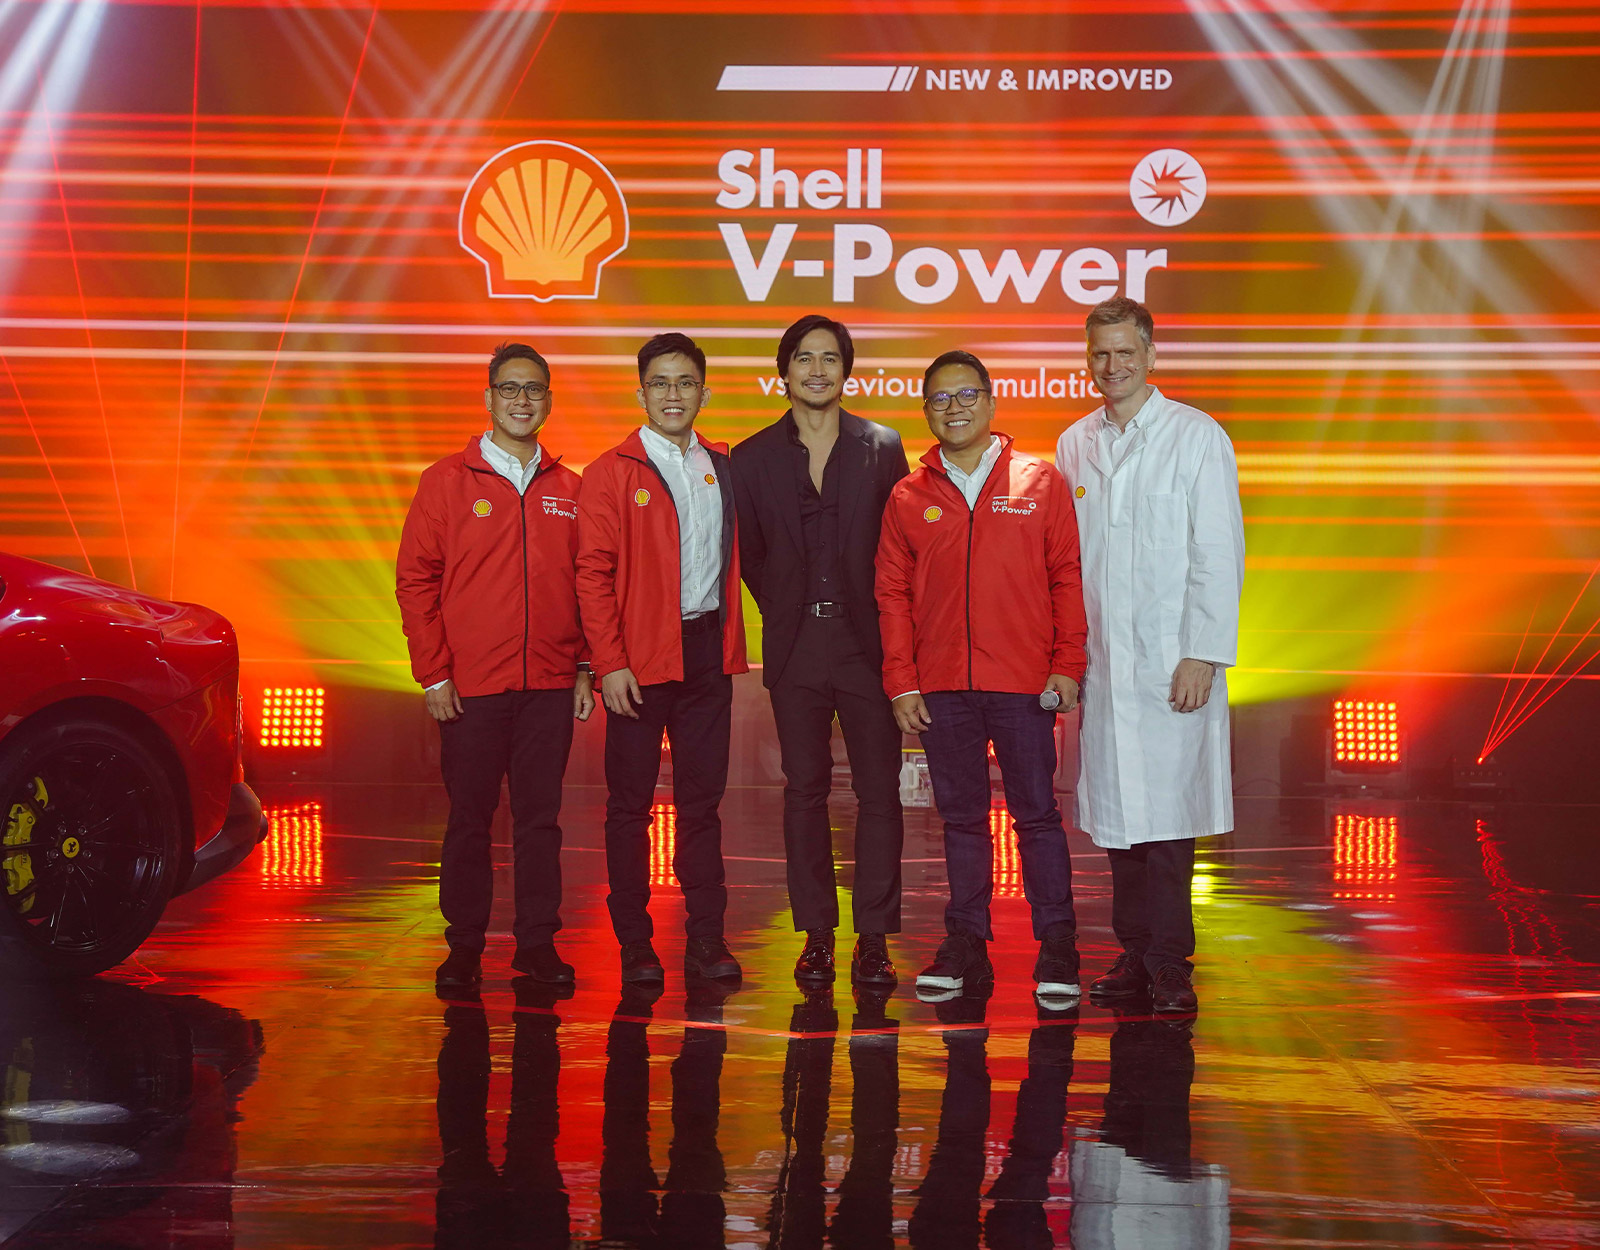 Piolo Pascual with the Shell V-Power Team